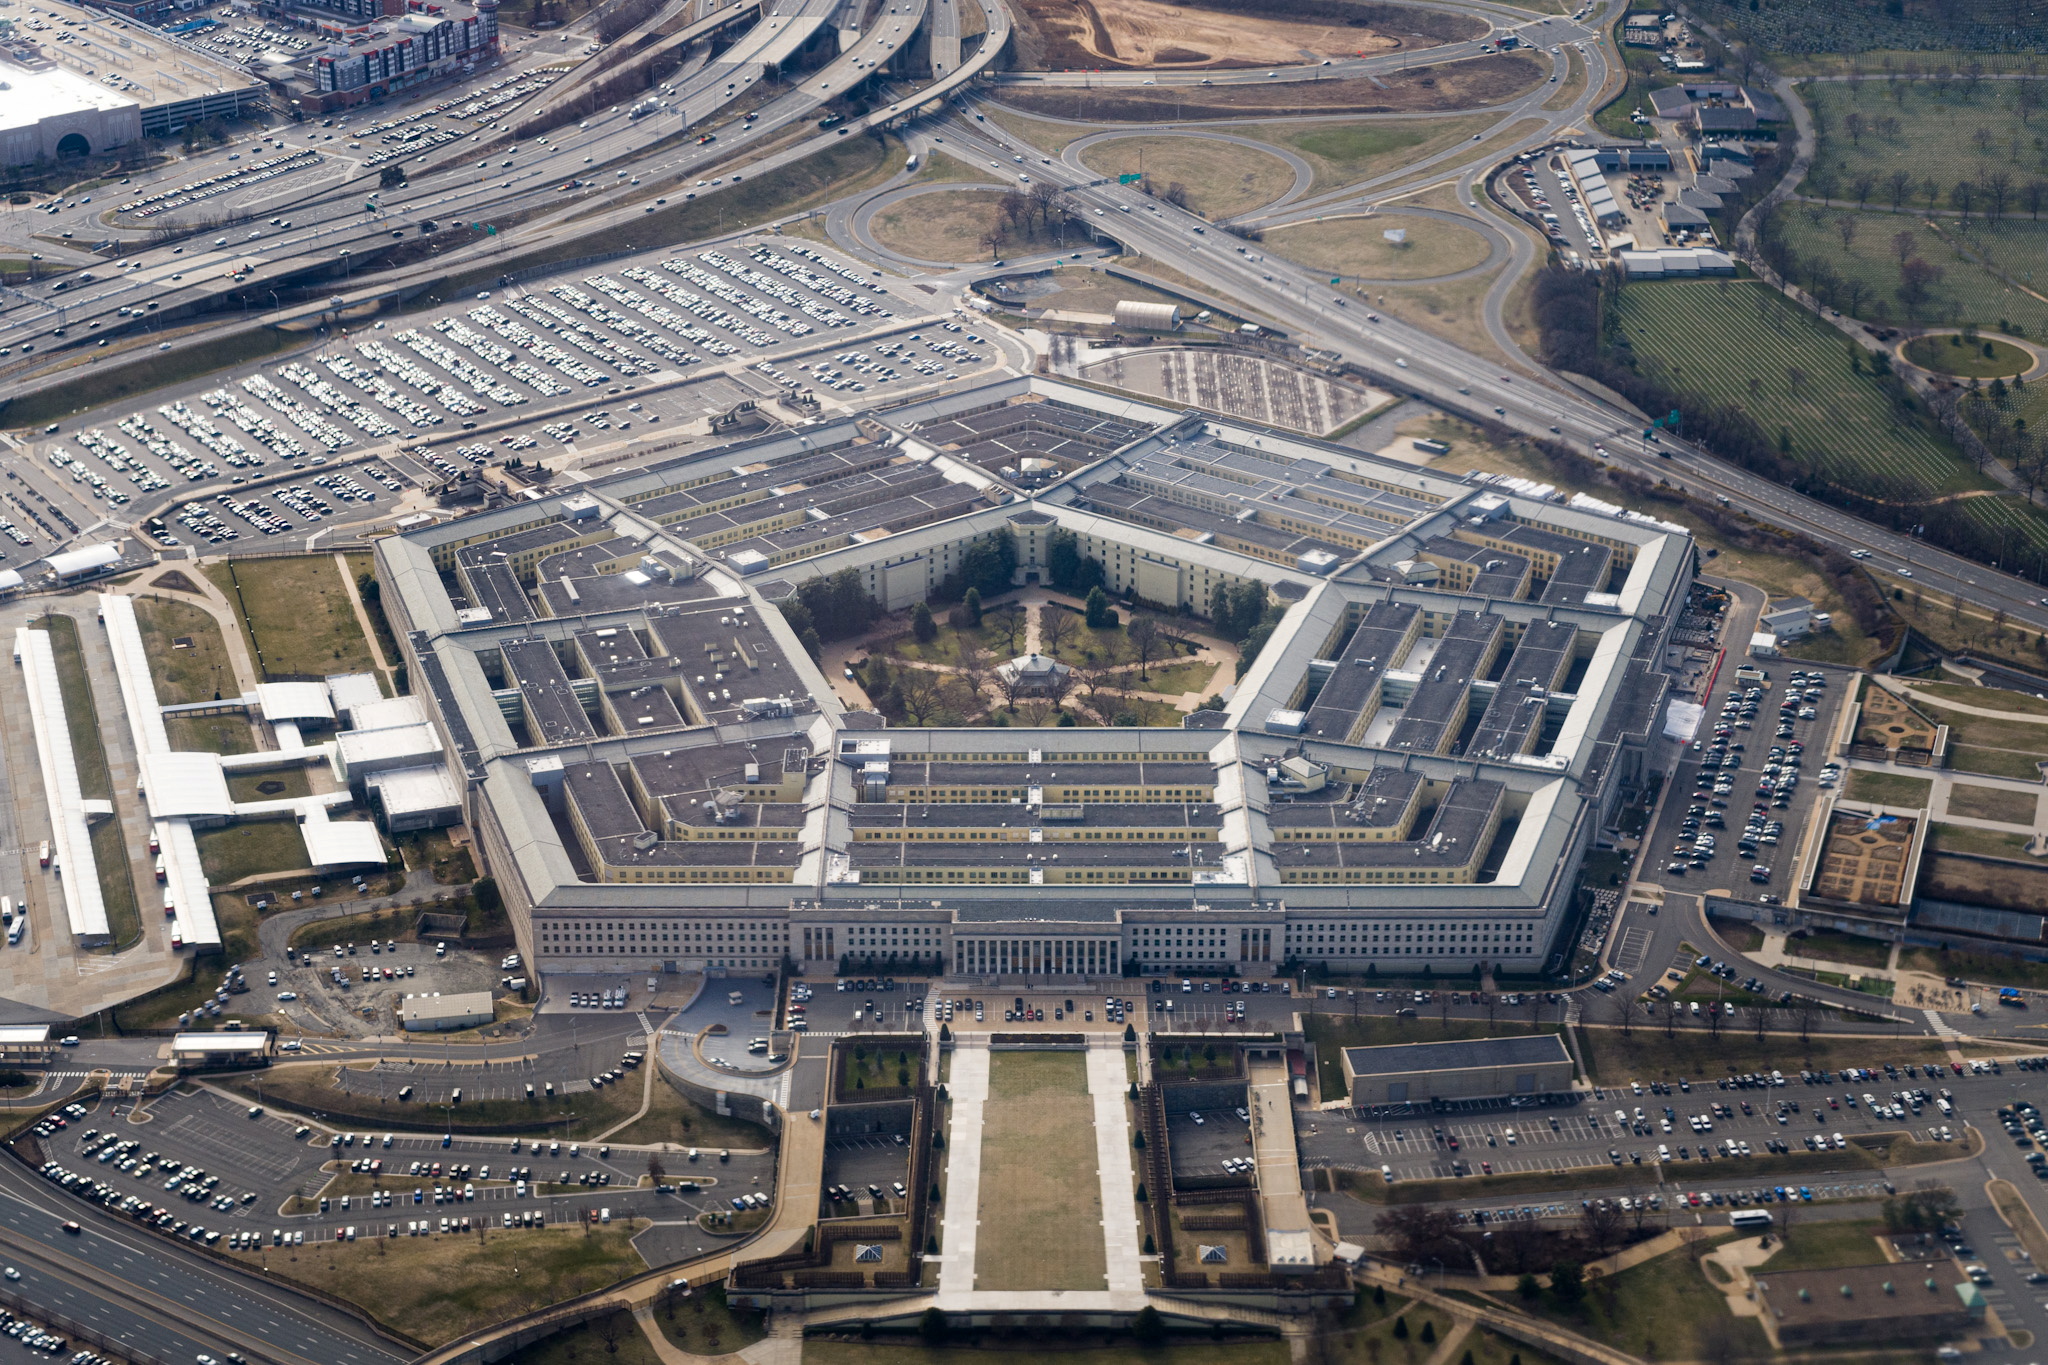 The Pentagon is seen from the air in Arlington, VA on March 3, 2022.